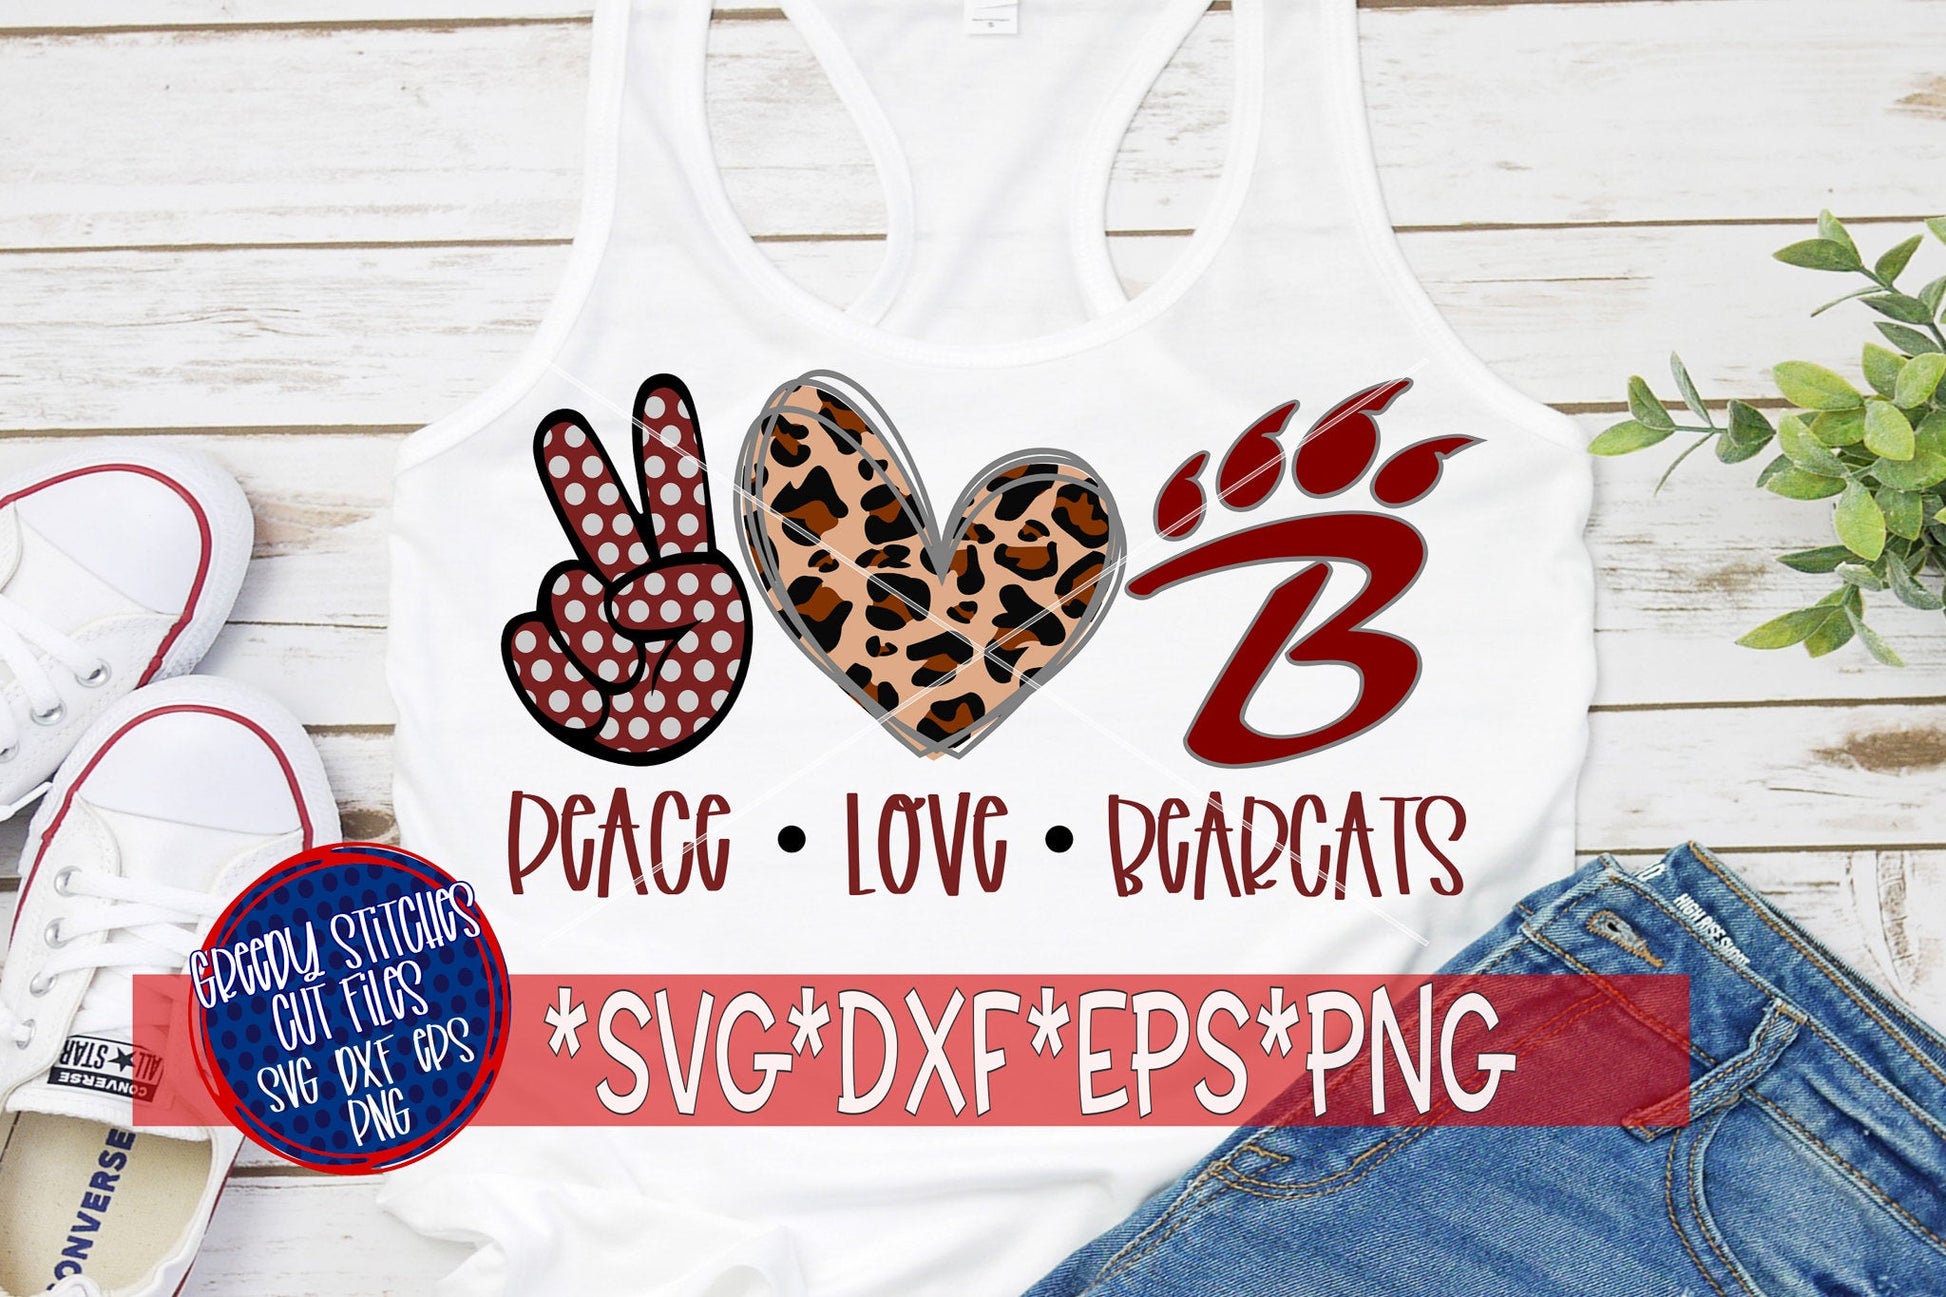 Bearcats SvG | Peace Love Bearcats svg dxf eps png. Peace Love Bearcats SvG | Lon Beach High School SvG | Instant Download Cut File